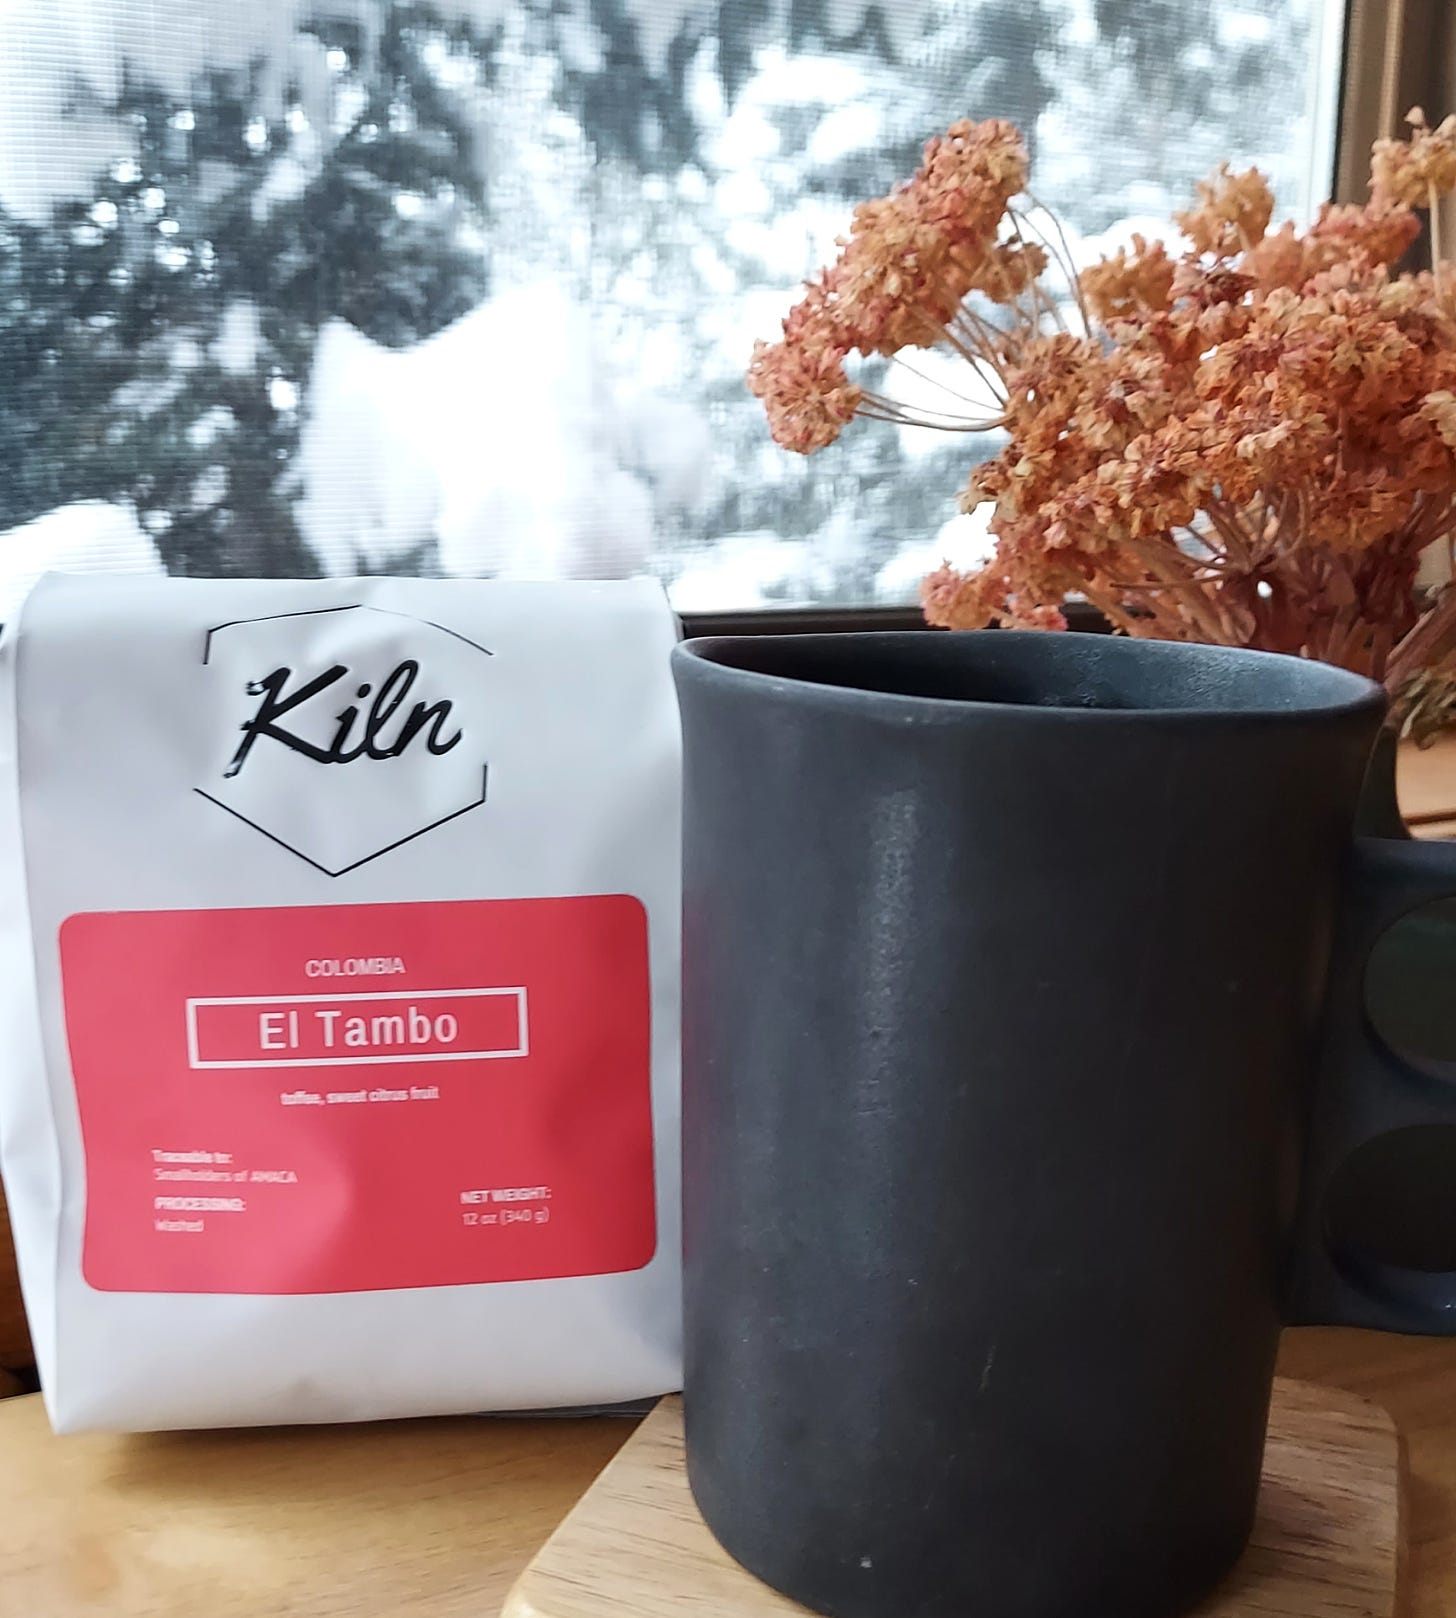 A ceramic, black coffee mug is on a wooden coaster in front of a window. Outside is a snow-covered pine tree. To the left of the mug is a white bag of coffee with a red label that says "Kiln" and in the back right is a small vase with dried, decorative flowers.